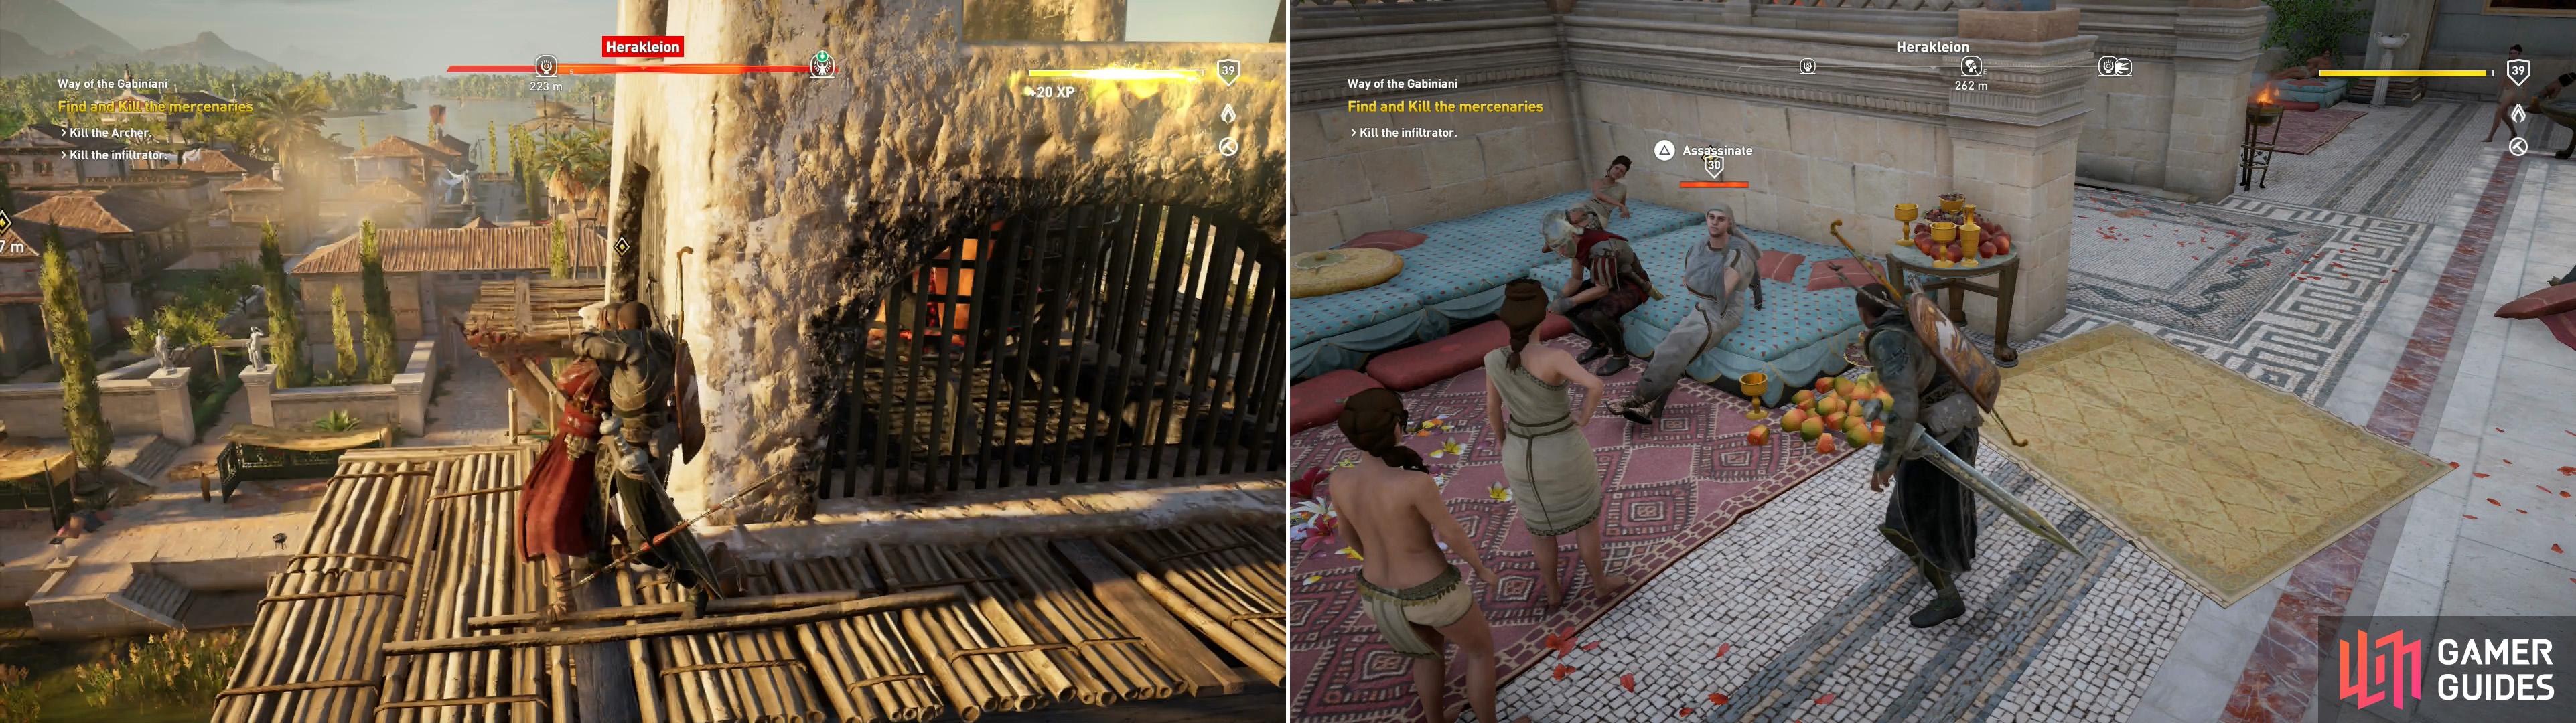 Climb a tower to kill the archer (left), then infiltrate the party to find the assassin disguised as a woman (right).